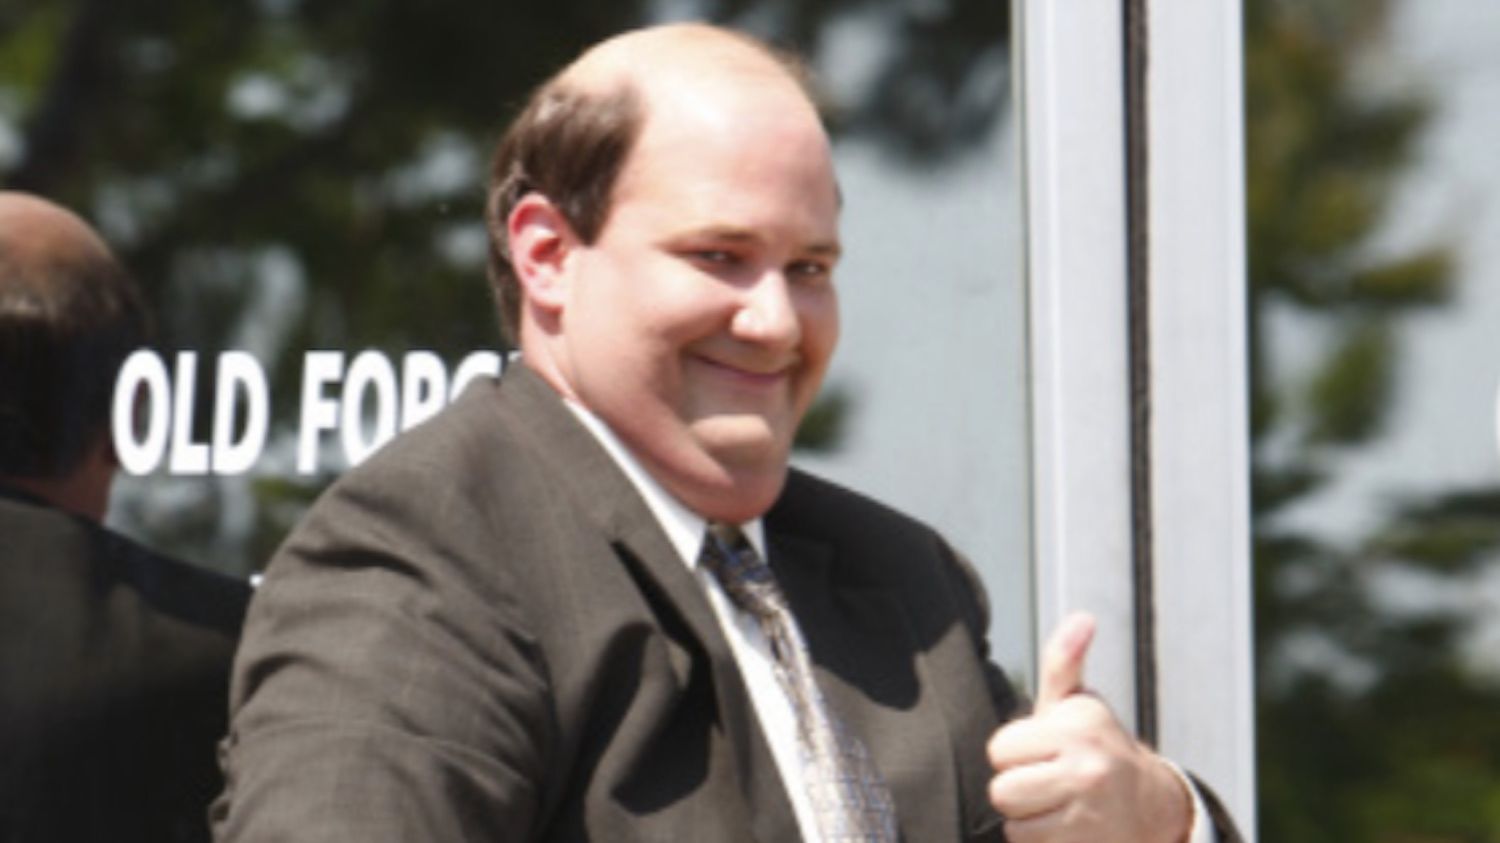 Movie fan theories  - office kevin malone - Old Fodc